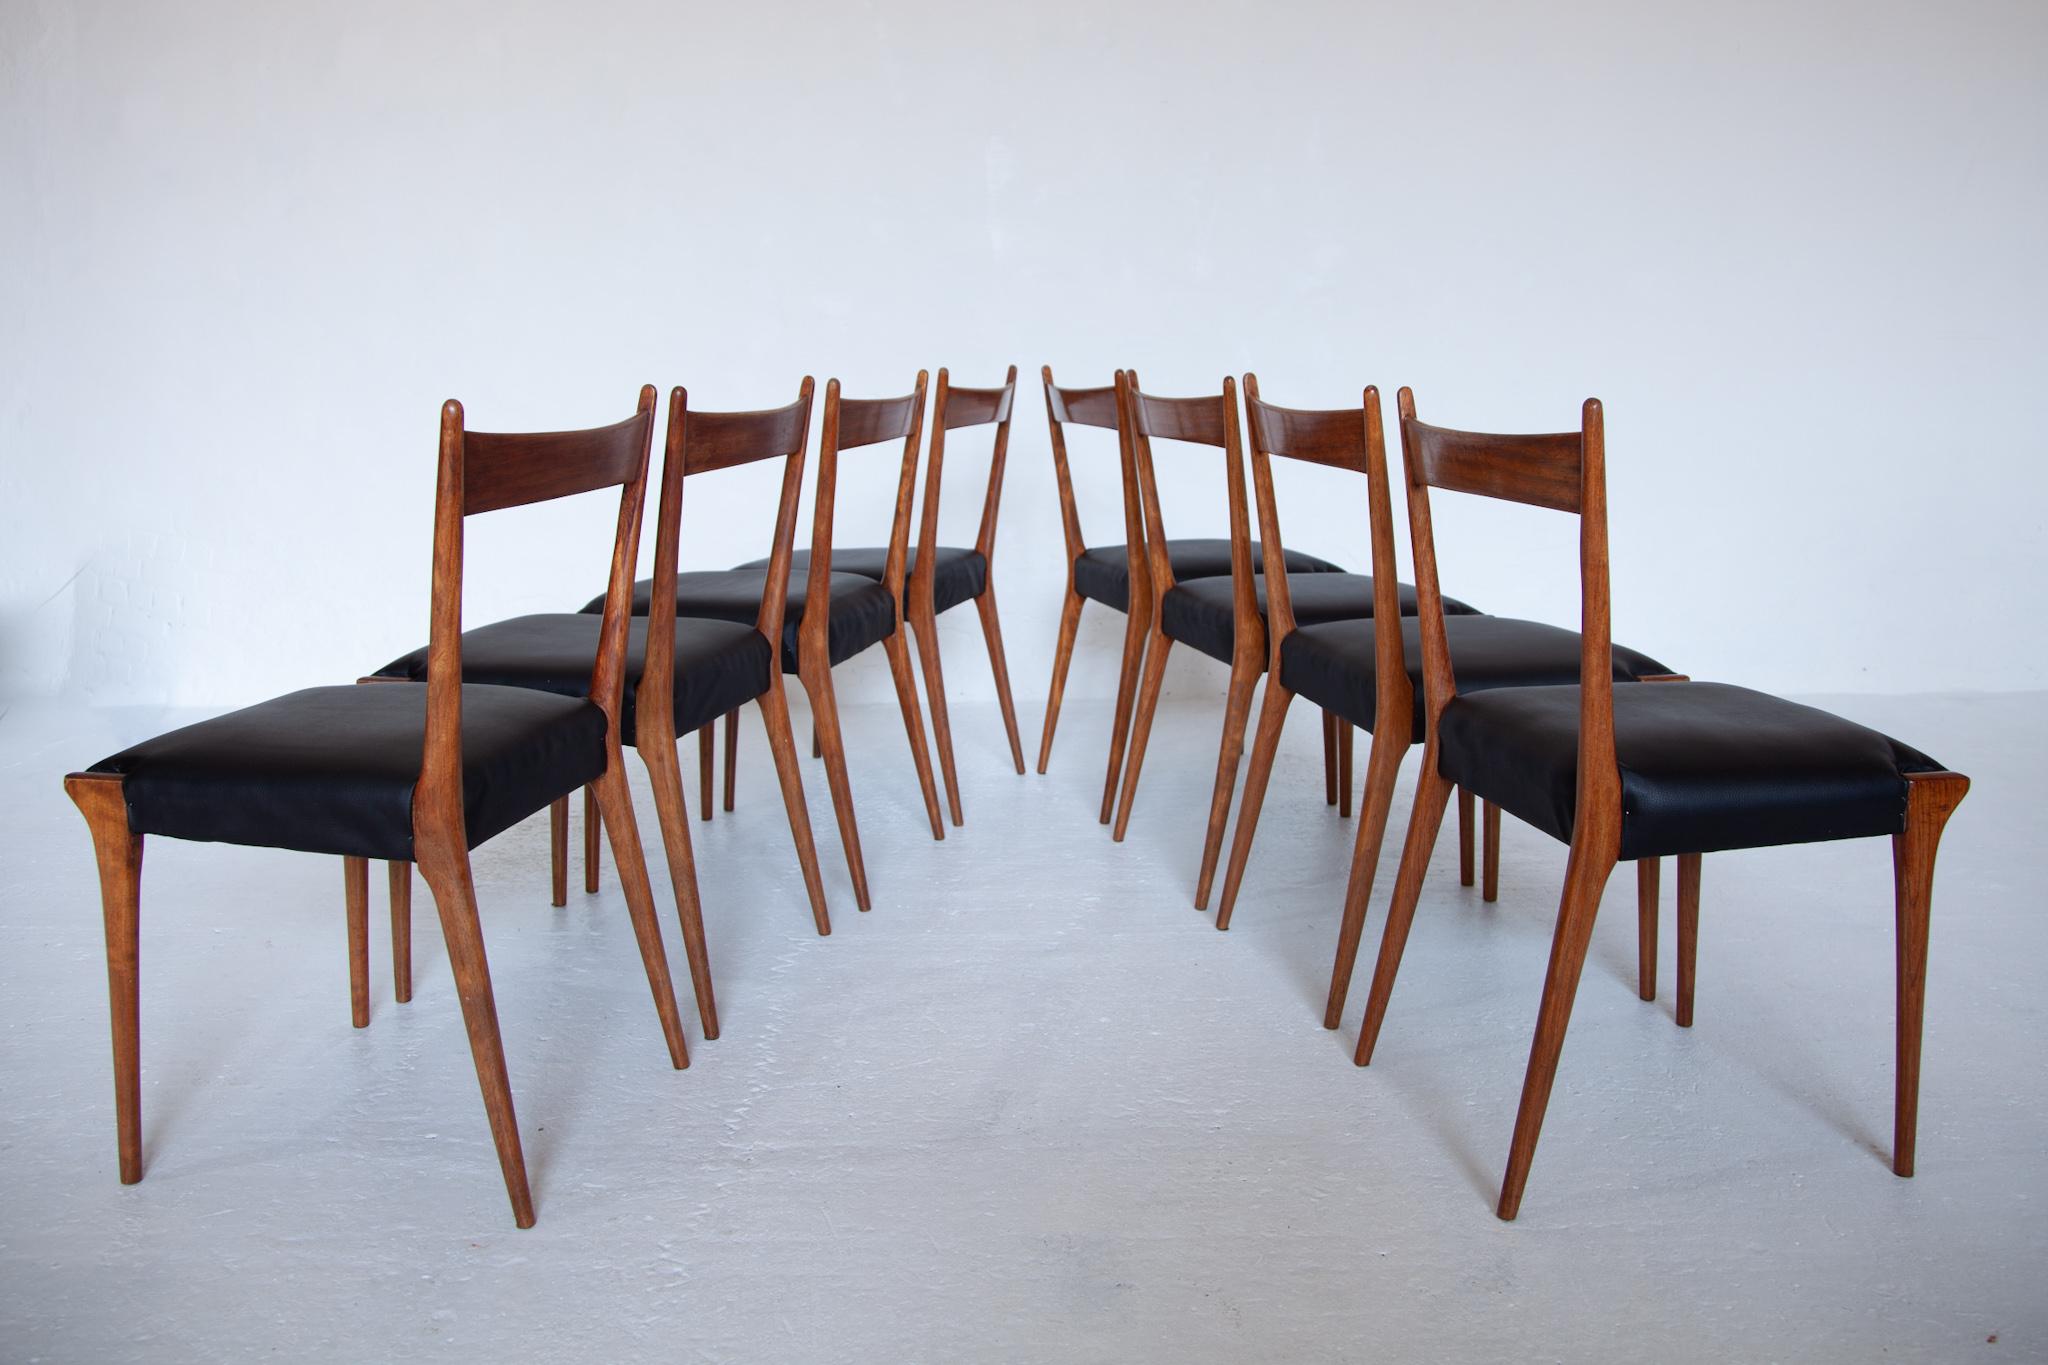 Mid-Century Modern Set of Eight Dining Chairs 1958, Belgium for Belform by Alfred Hendrickx For Sale